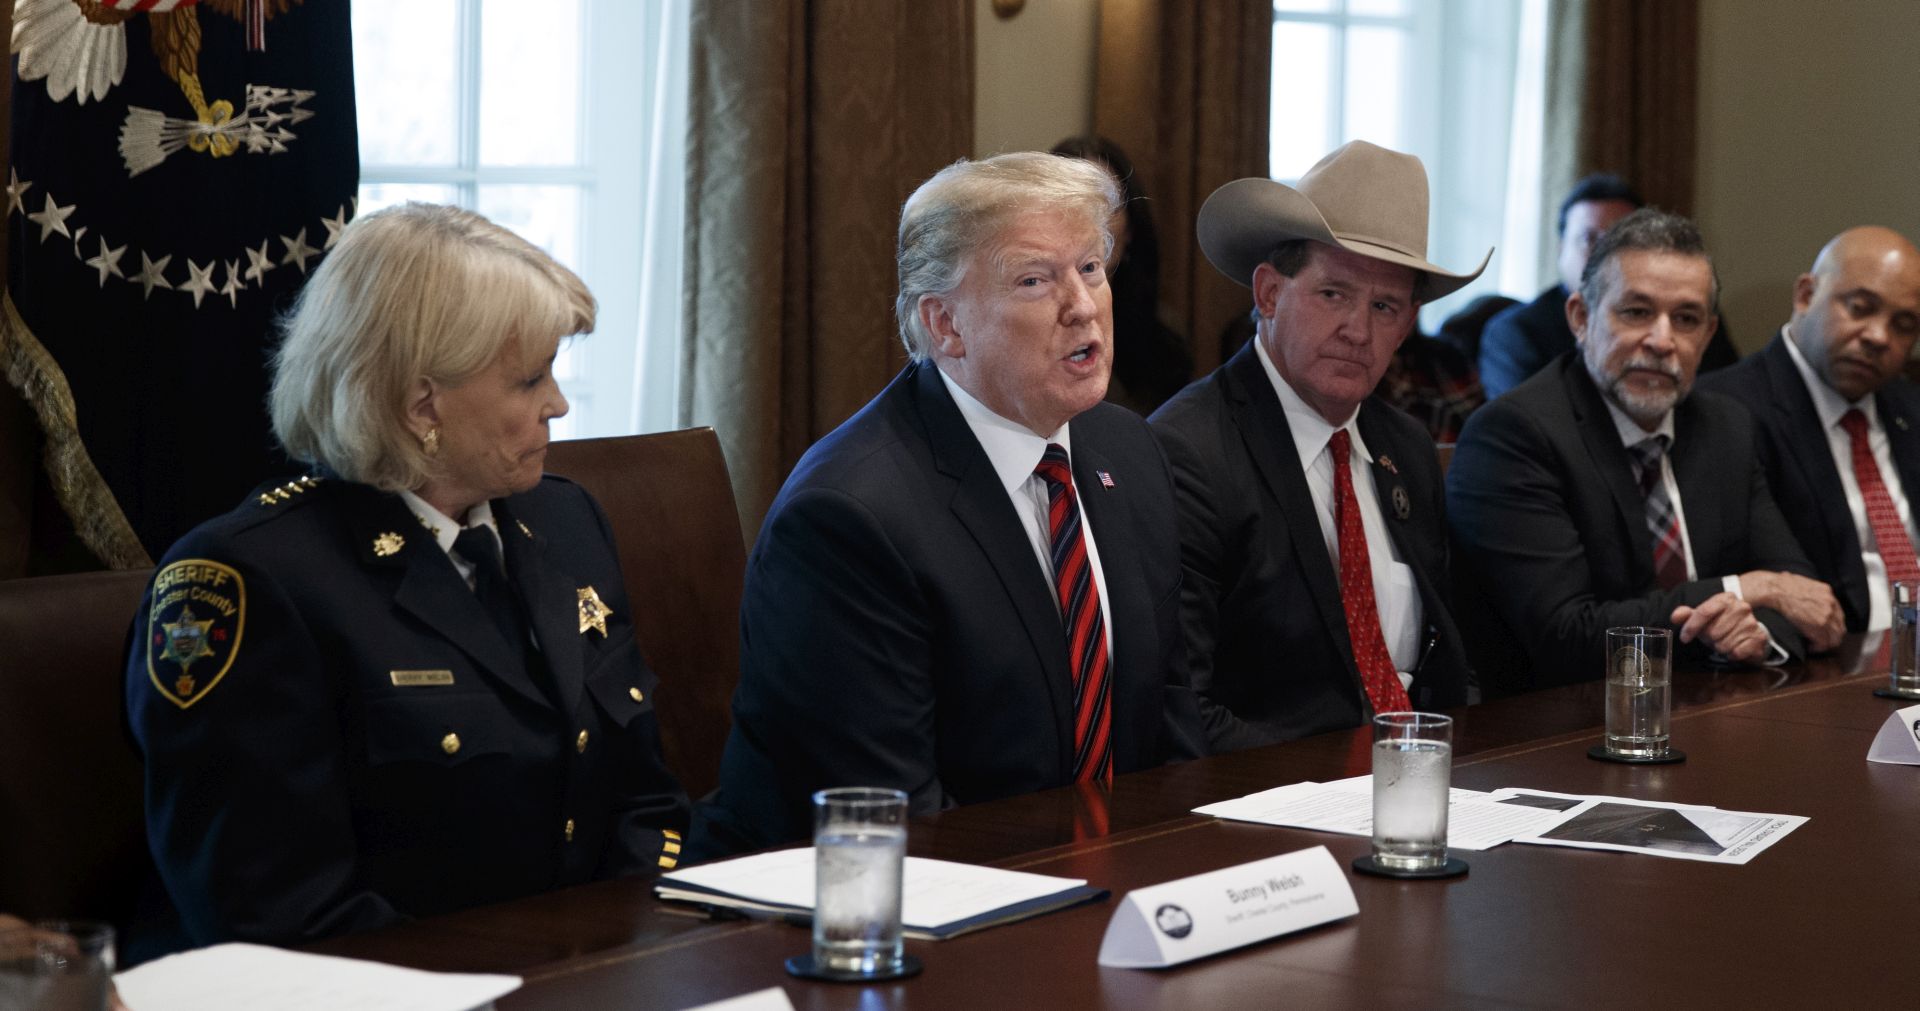 epa07276203 US President Donald J. Trump (2-L) participates in a roundtable discussion on border security and safe communities with State, local and community leaders in the Cabinet Room of the White House in Washington, DC, USA 11 January 2019. Picture with Trump are among others Chester County Sheriff Carolyn Bunny Welsh (L) and Jackson County Sheriff AJ Louderback (3-L). Te partial government shutdown, which is tied for the longest in US history, has affected about 800,000 federal workers.  EPA/SHAWN THEW